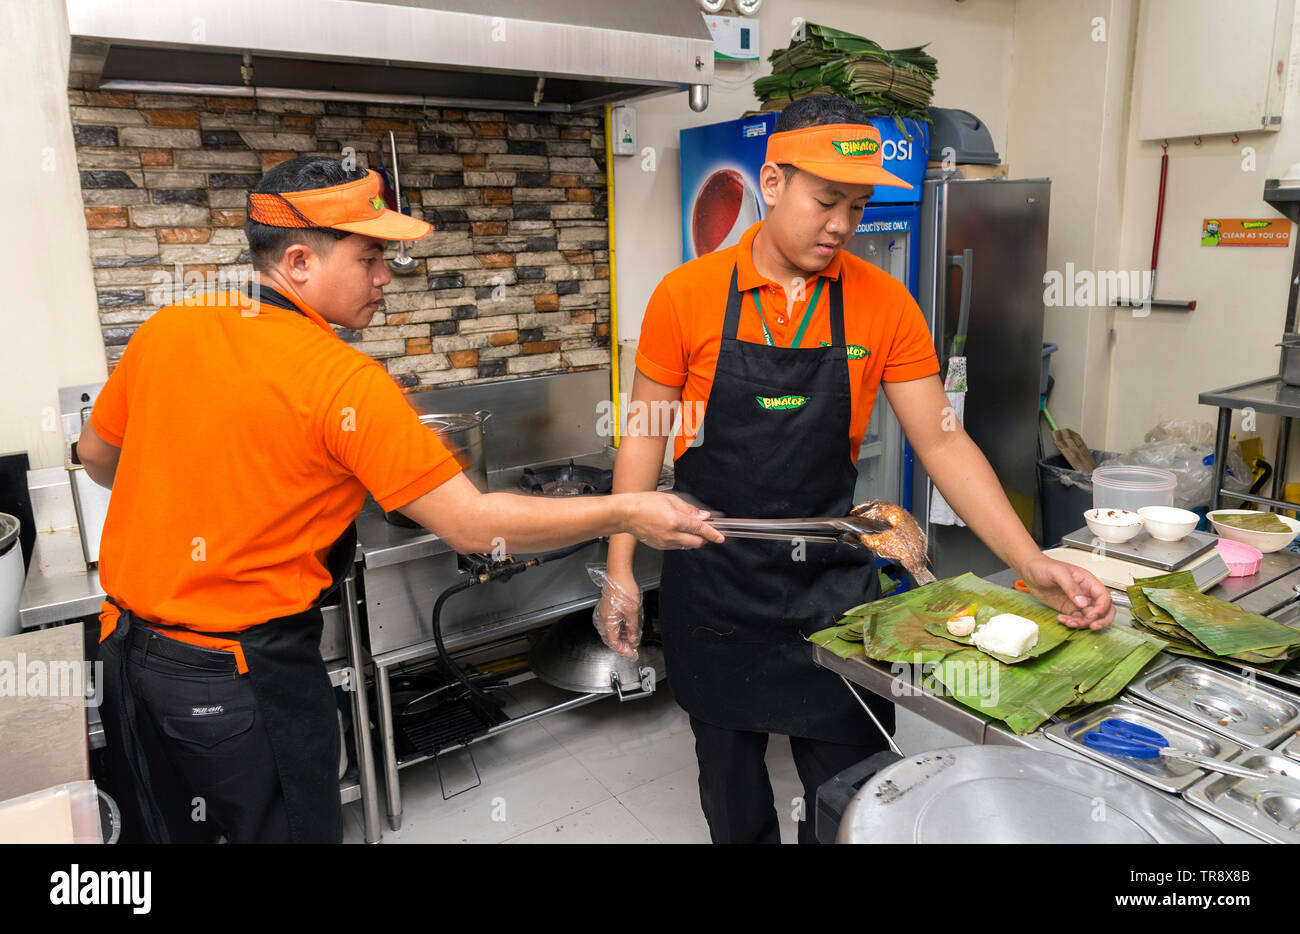 Manila, Philippines - July, 26, 2016: Two young men serving food in a filipino restaurant kitchen in Manila Stock Photo